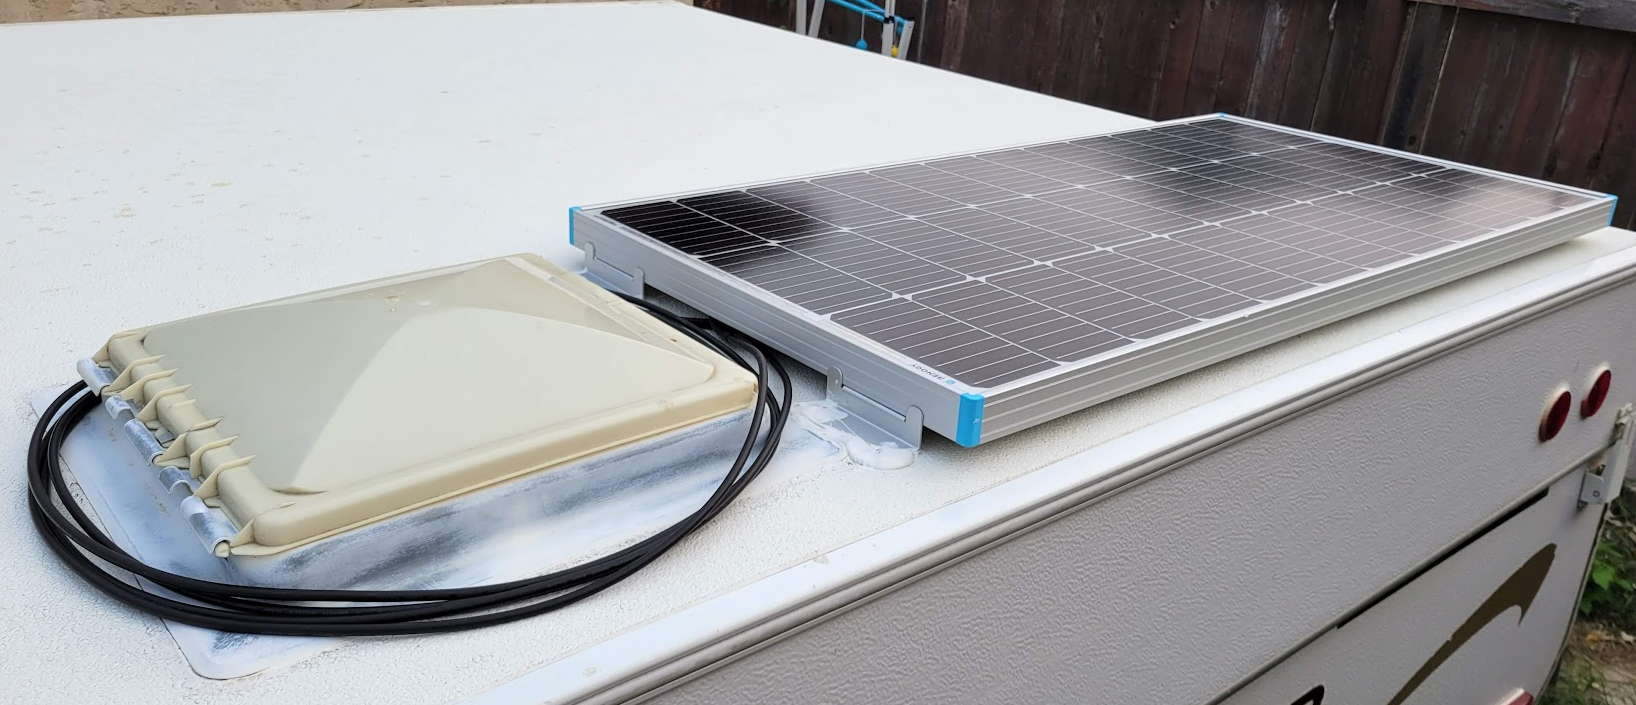 Renogy 100w Monocrystalline Solar Kit Review & Install on a Popup Camper